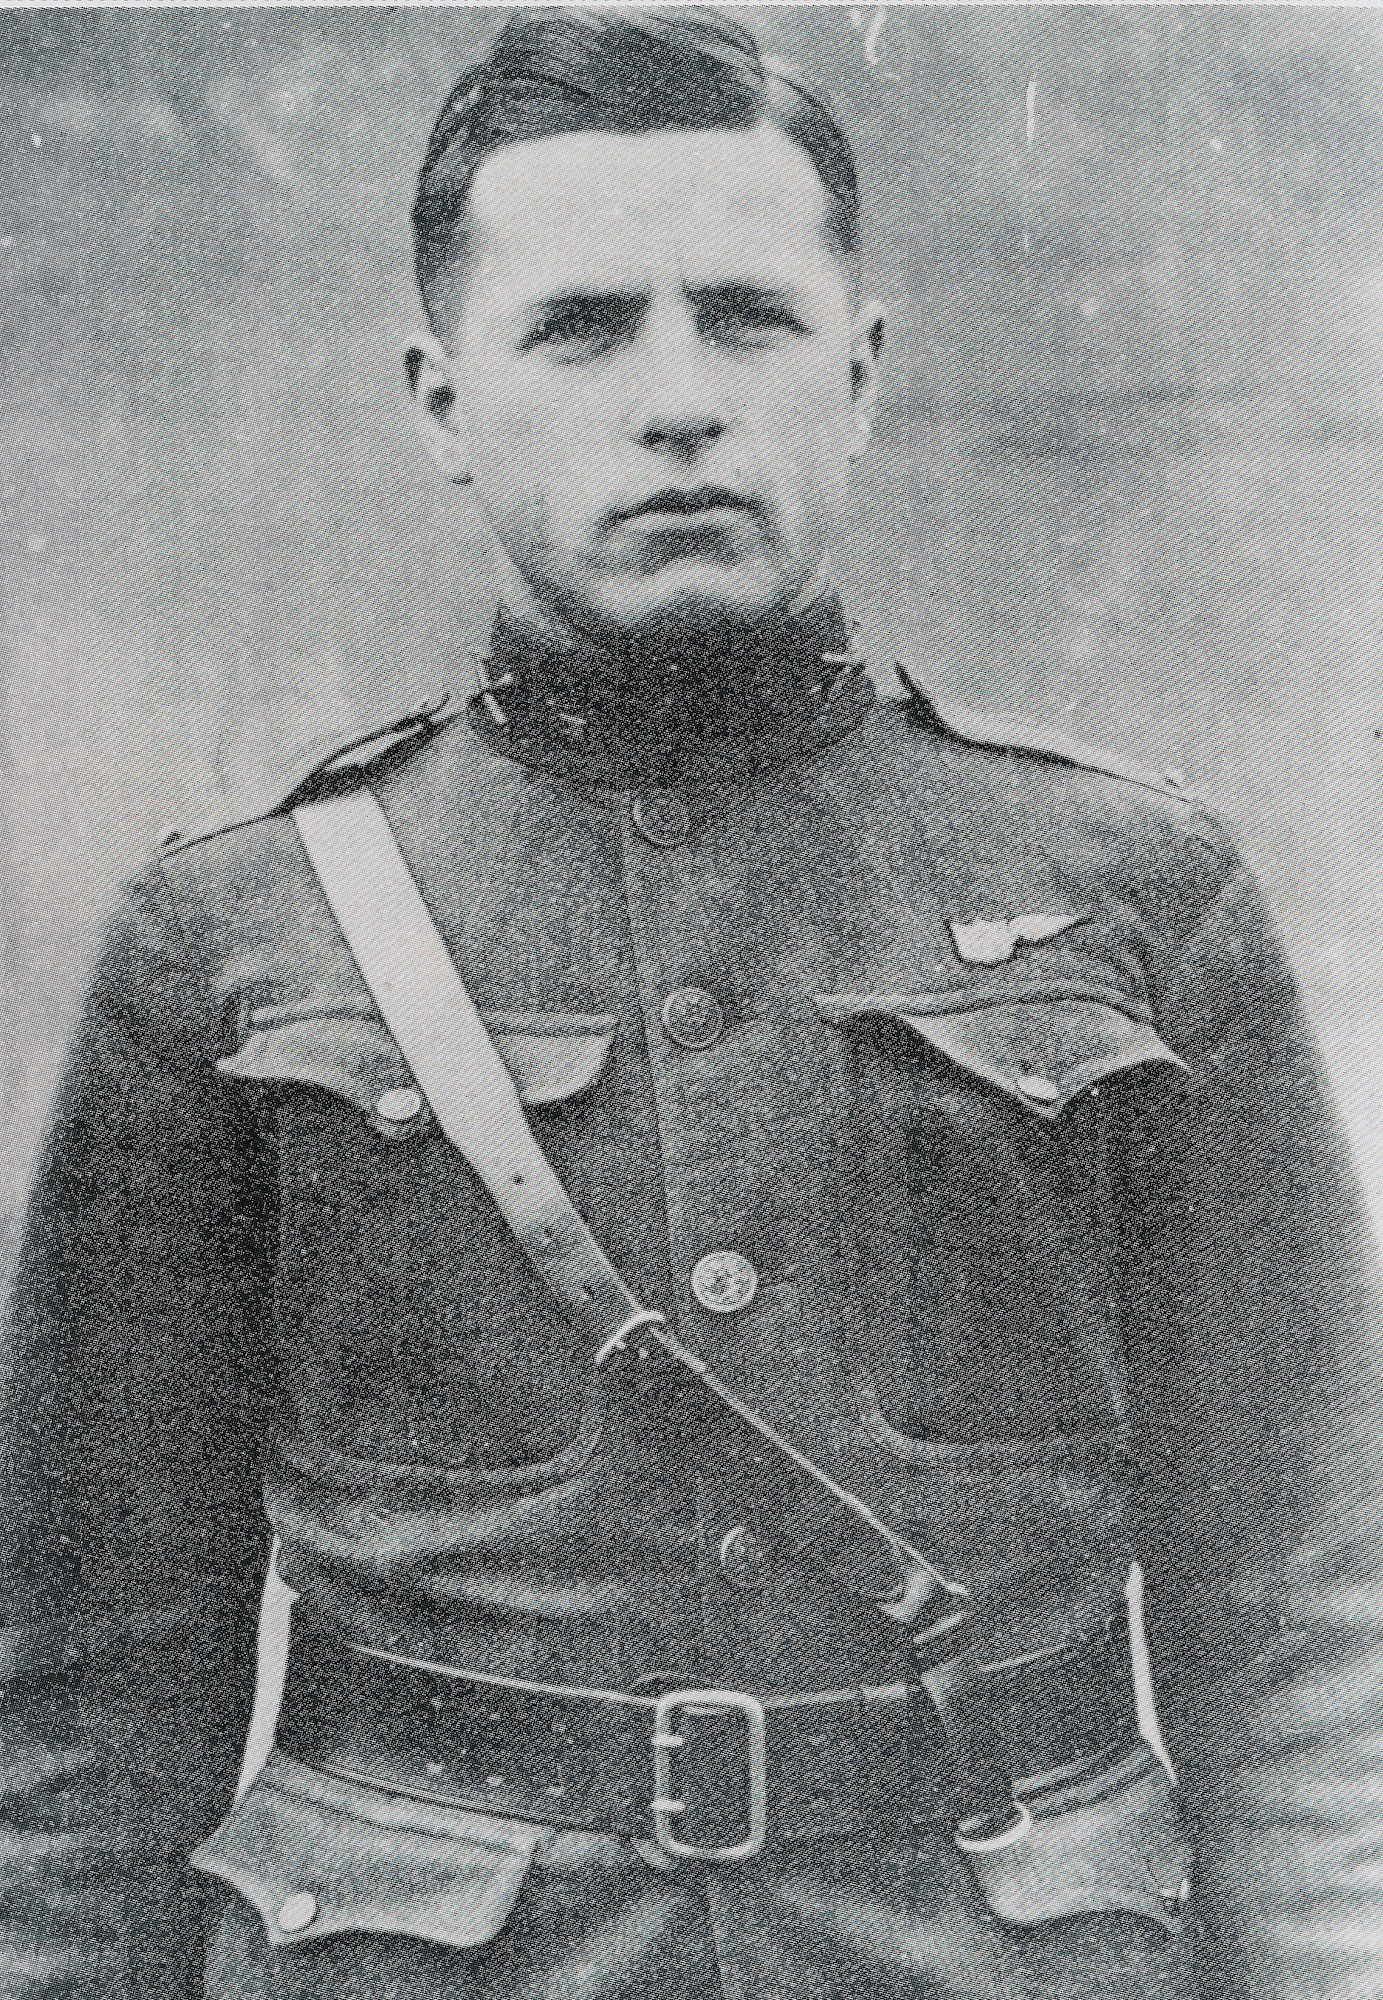 U.S. Army 2nd Lt. Erwin Bleckley, 50th Aero Squadron forward observer, received the Medal of Honor for his flight to find and drop supplies to the Lost Battalion in Meuse-Argonne, France, Oct. 6, 1918.